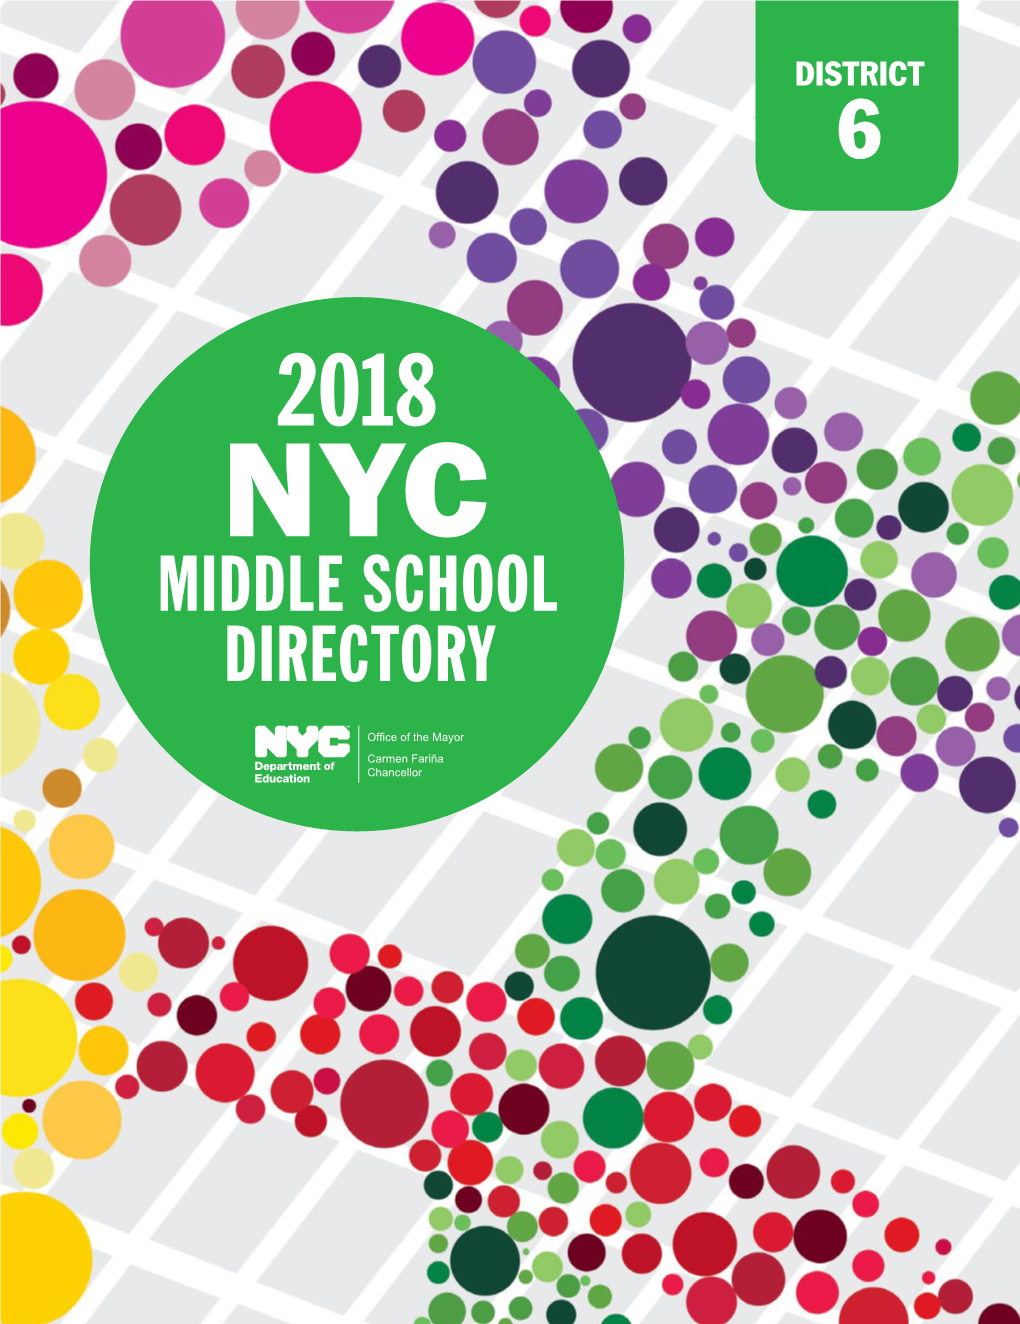 Middle School Directory